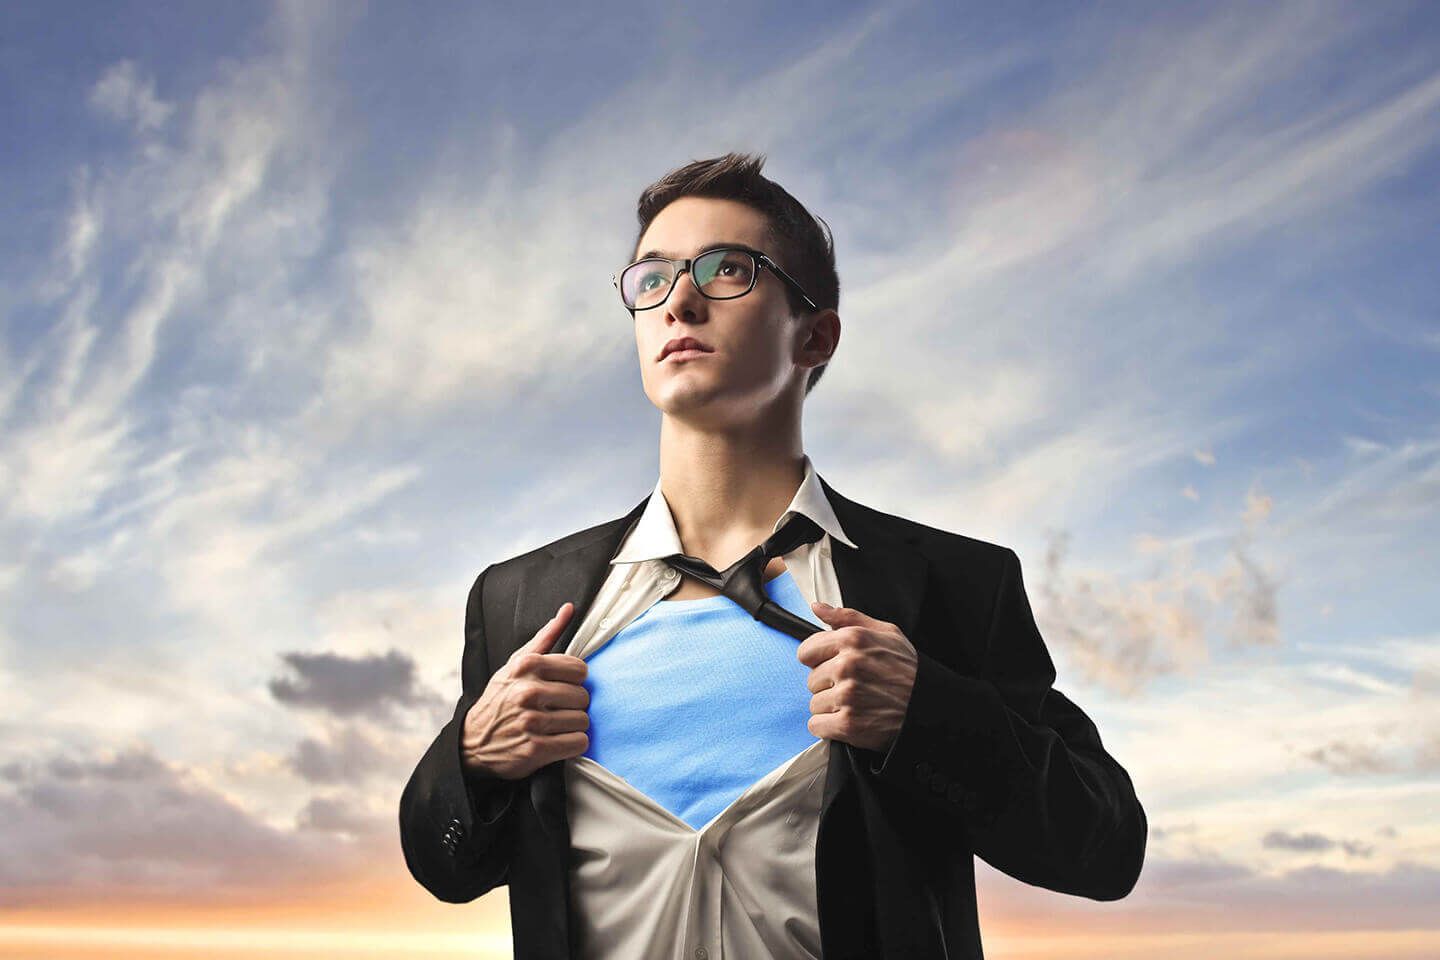 So You Think Hiring a Business Superhero Is the Answer. Really?